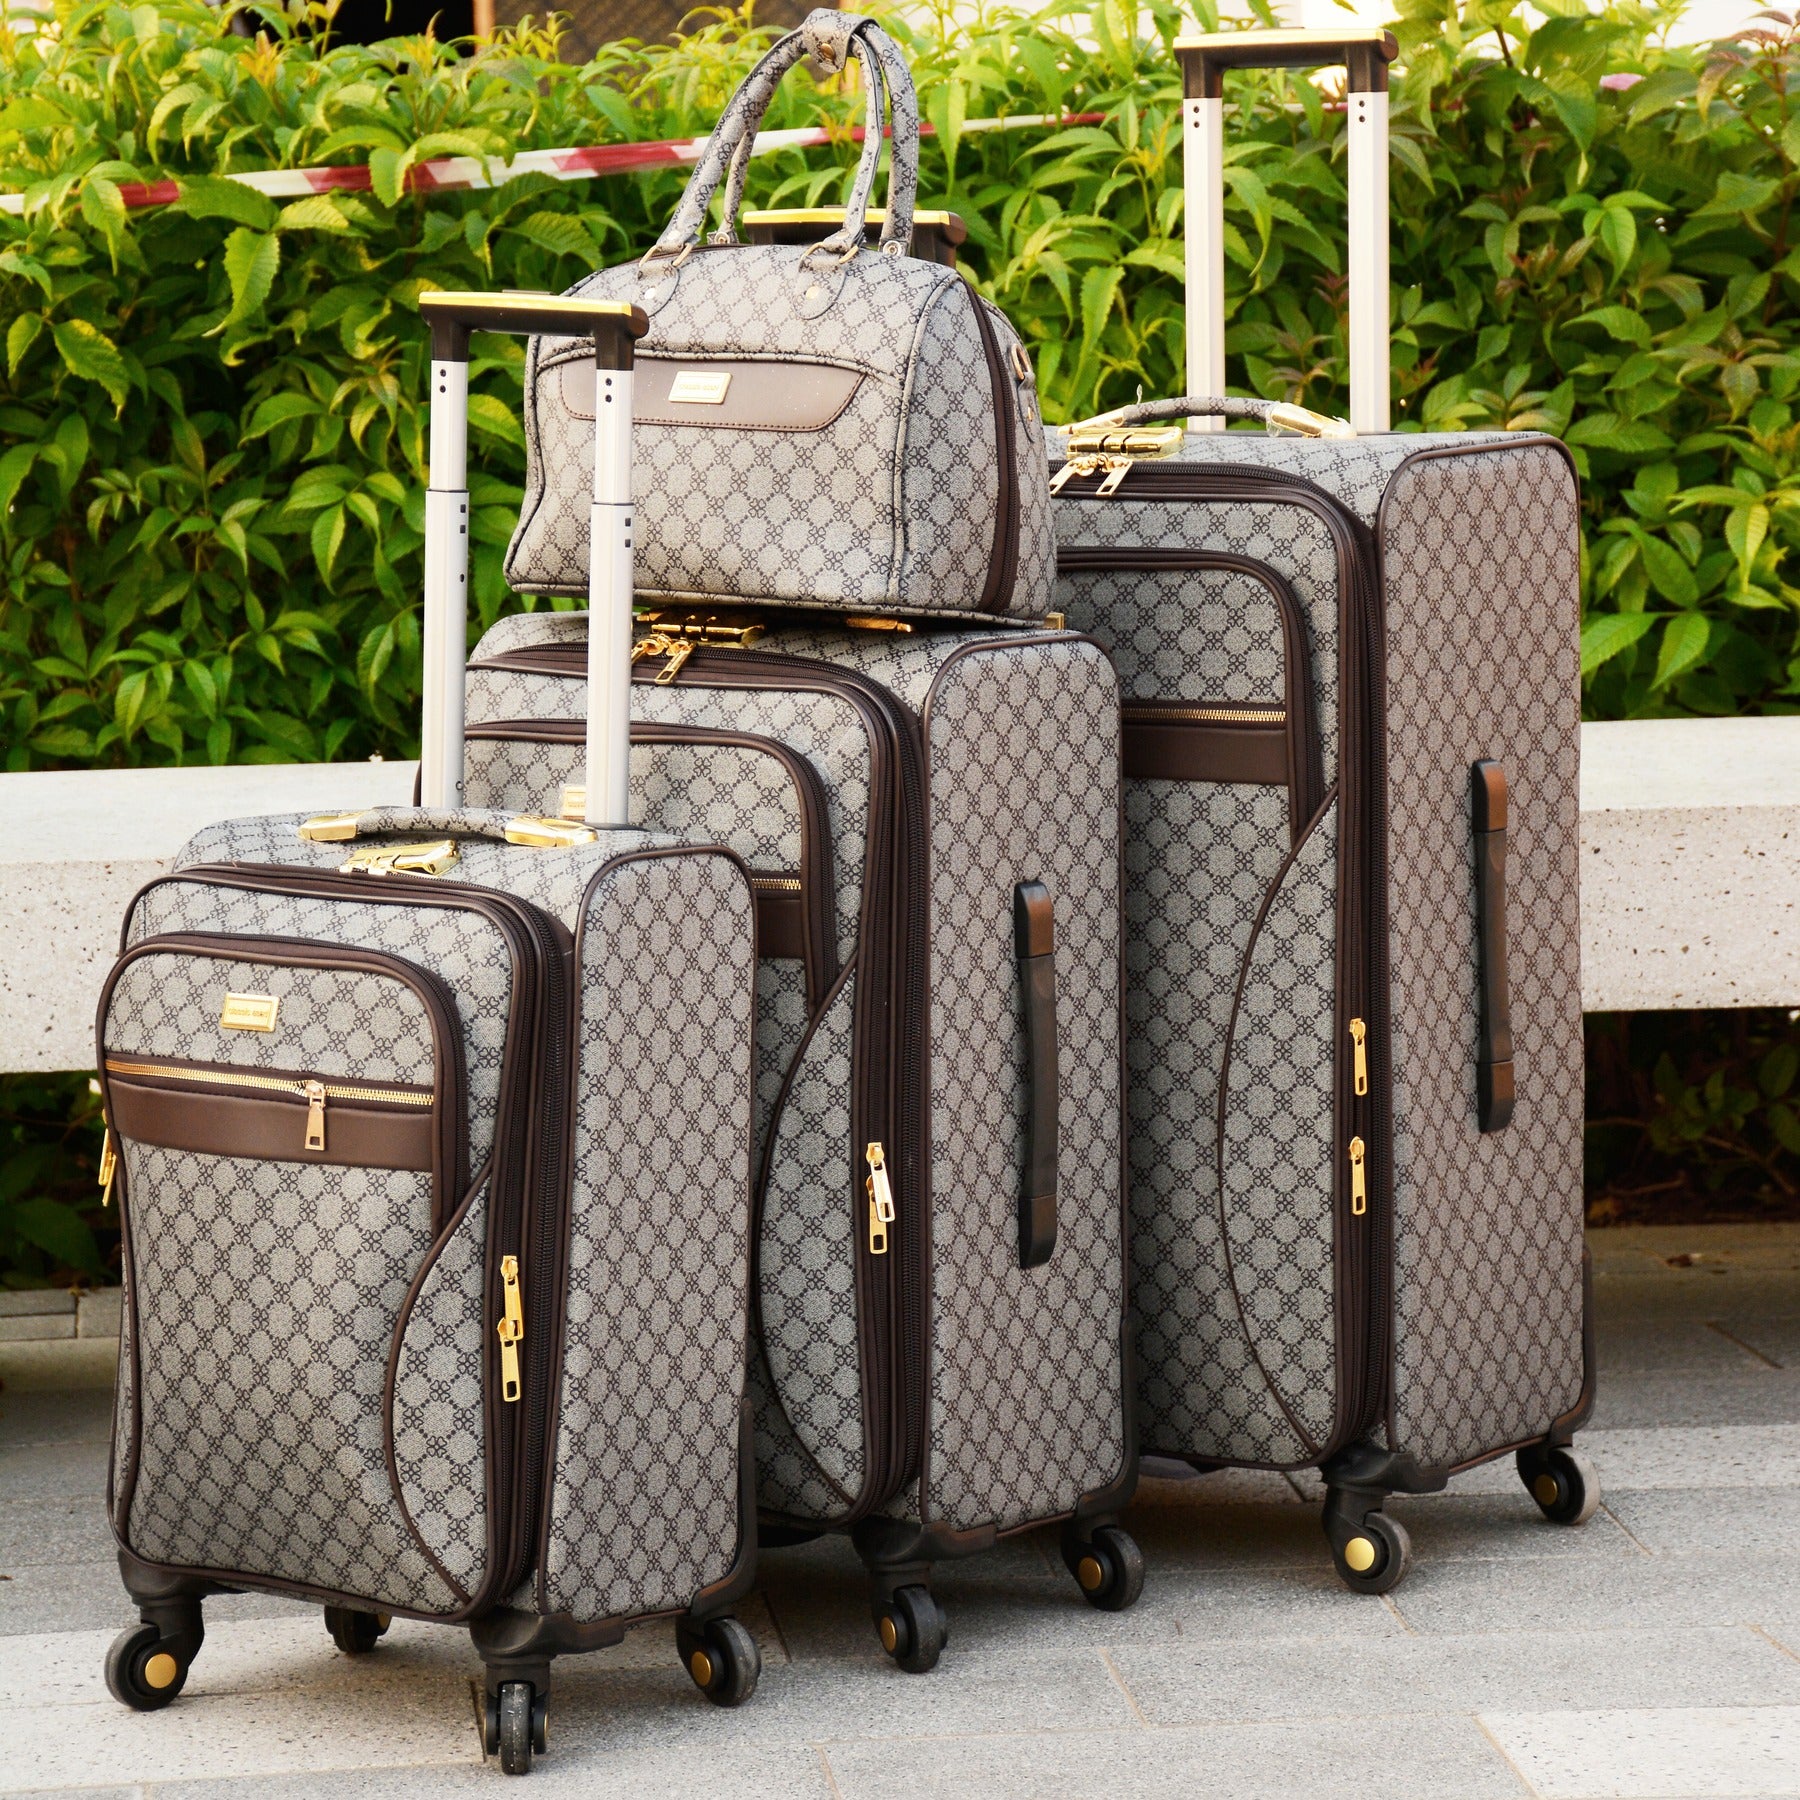 VL PU Leather Material Luggage | Soft shell Spinner Wheel Trolley Bag | 4 Pcs Full Set